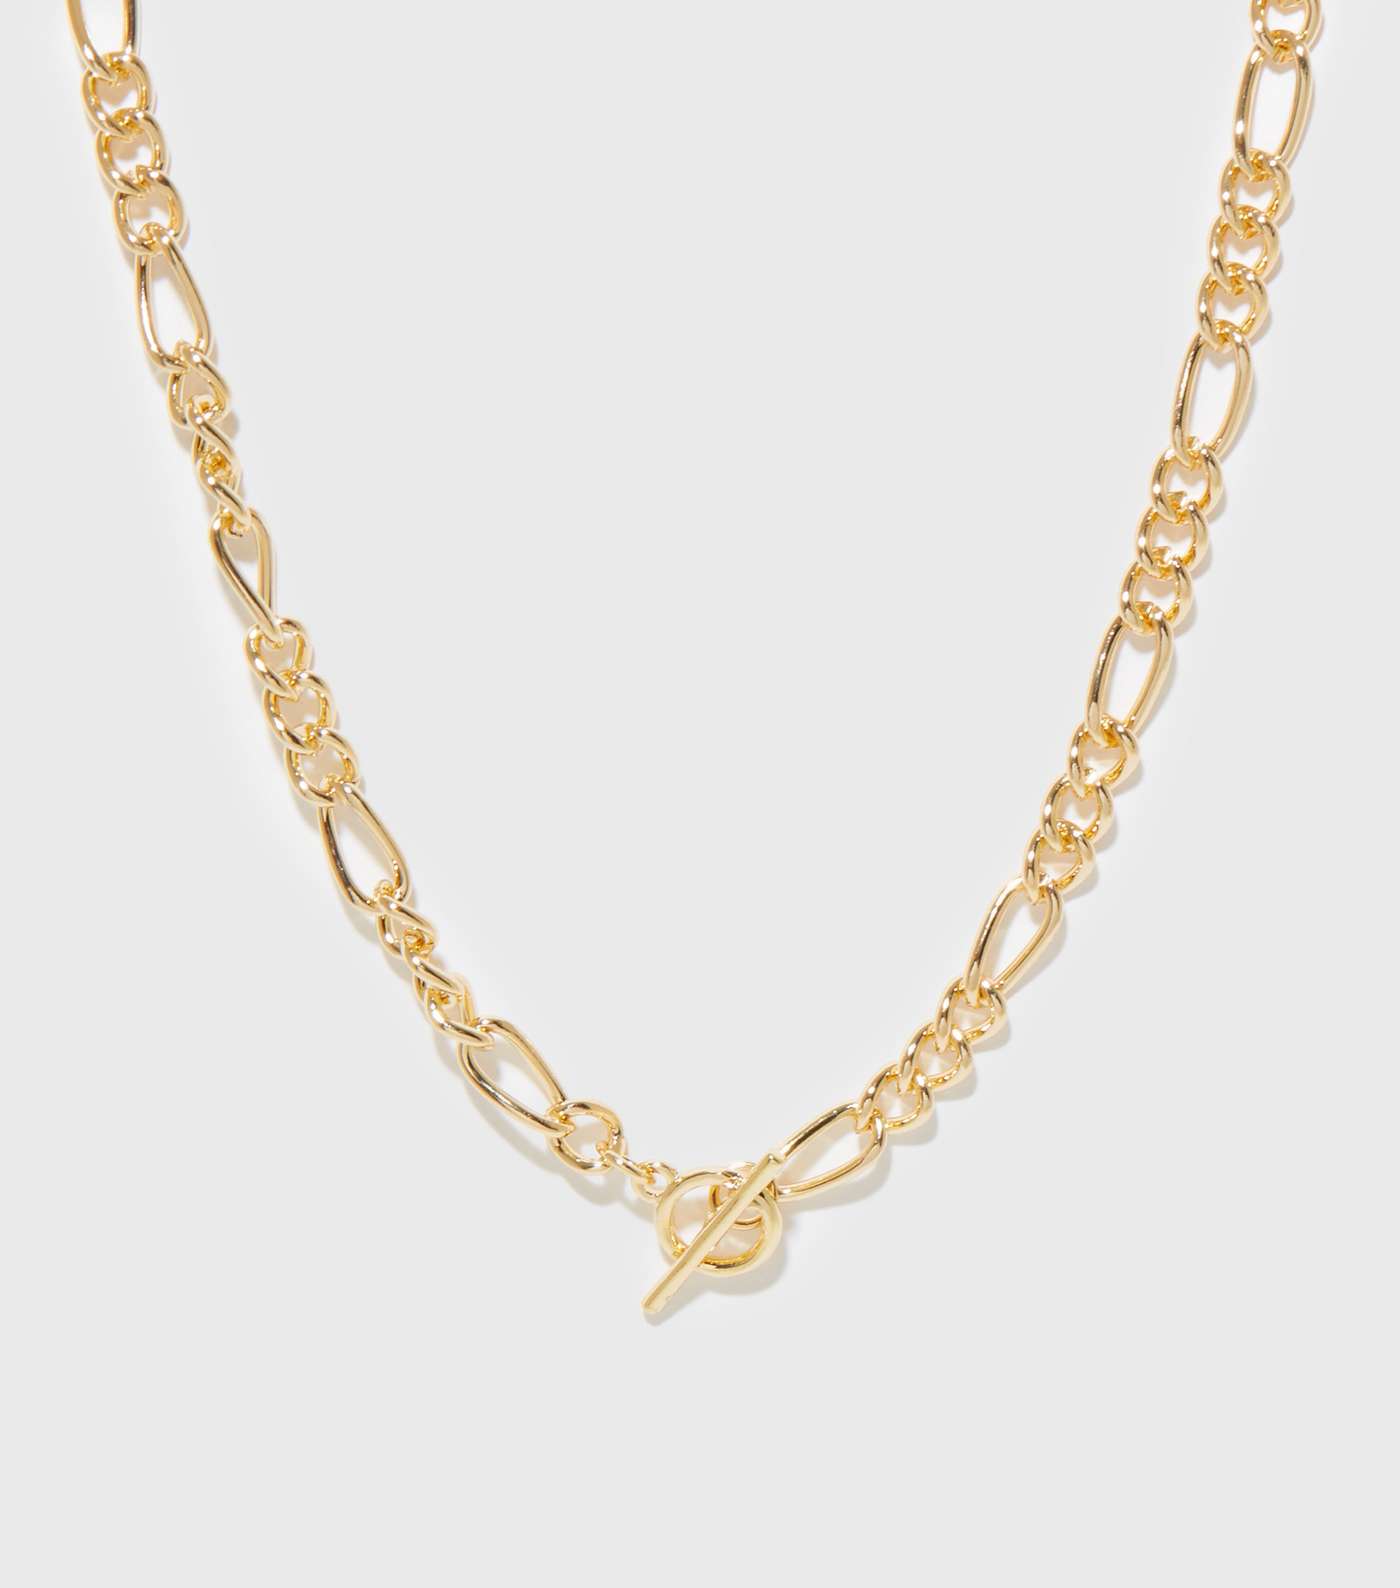 Gold T Bar Chain Necklace